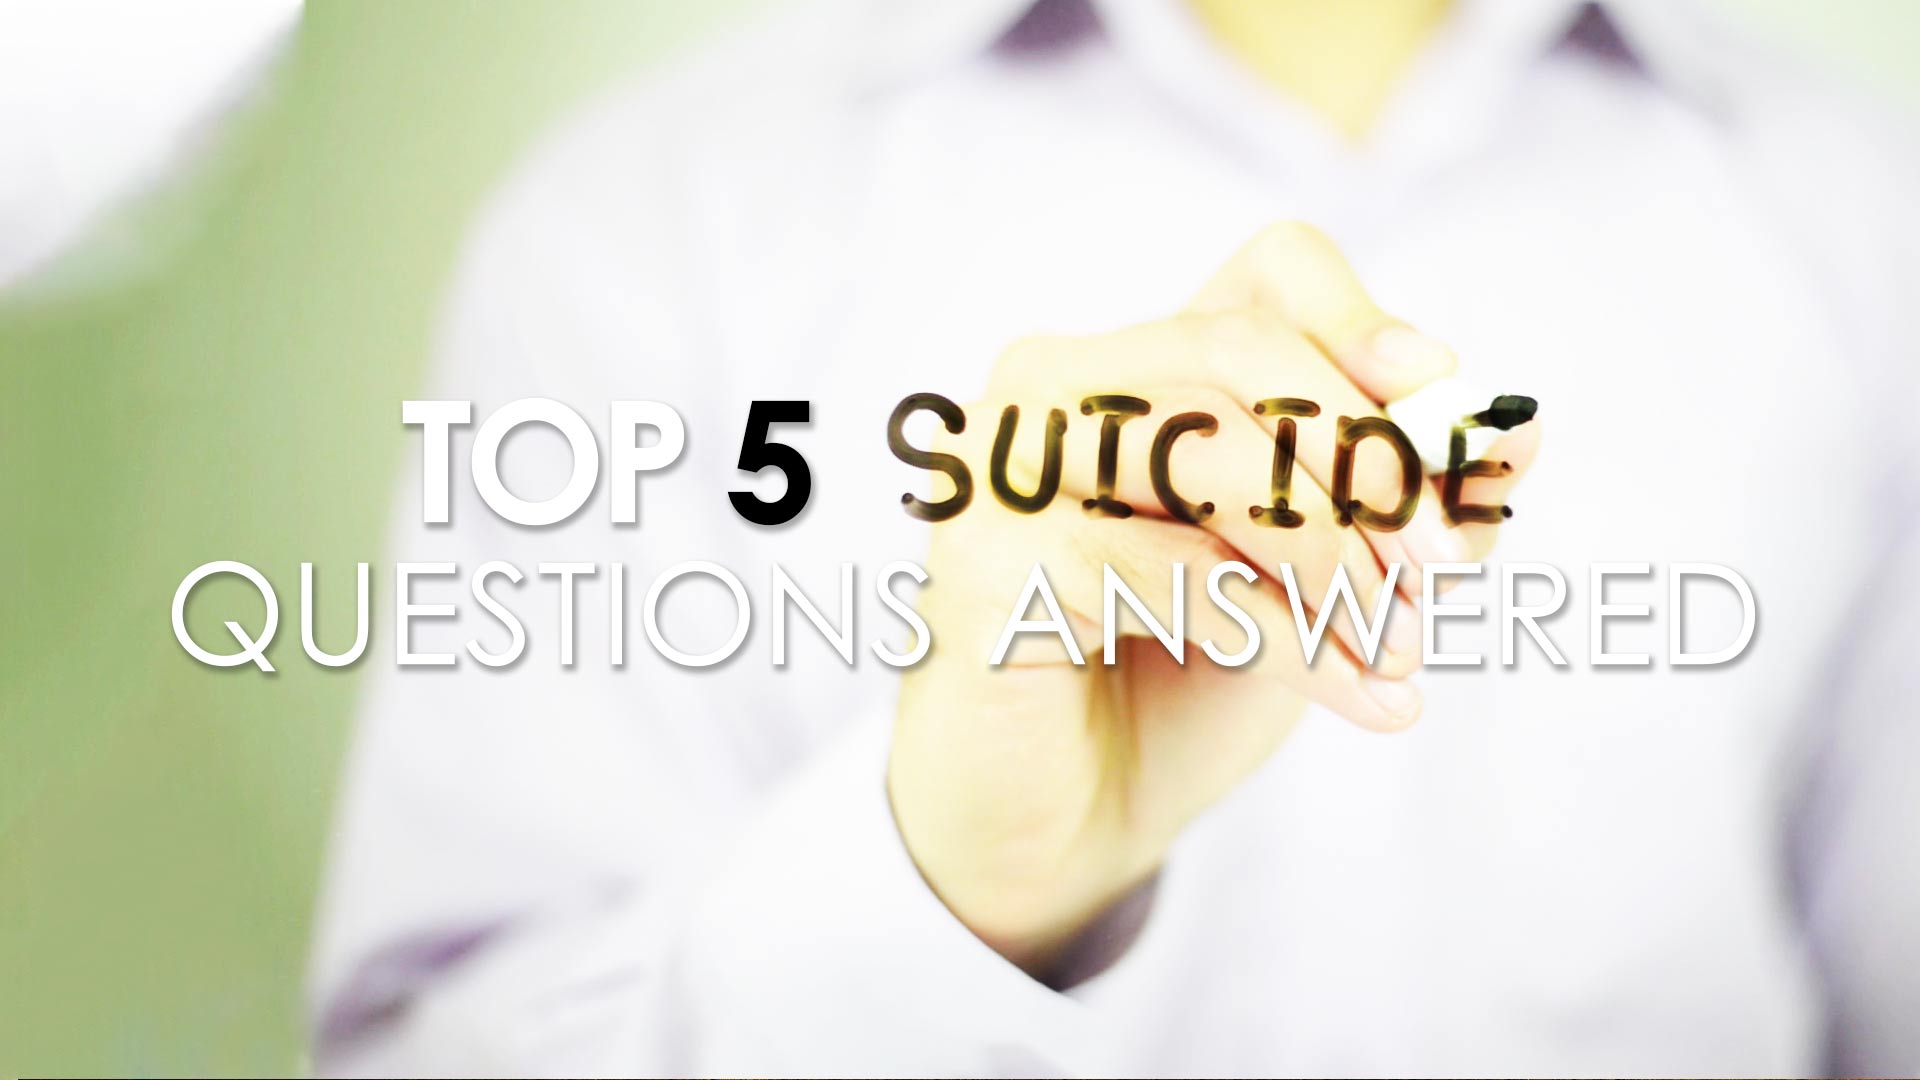 Suicide Prevention Awareness | Top 5 Questions Answered